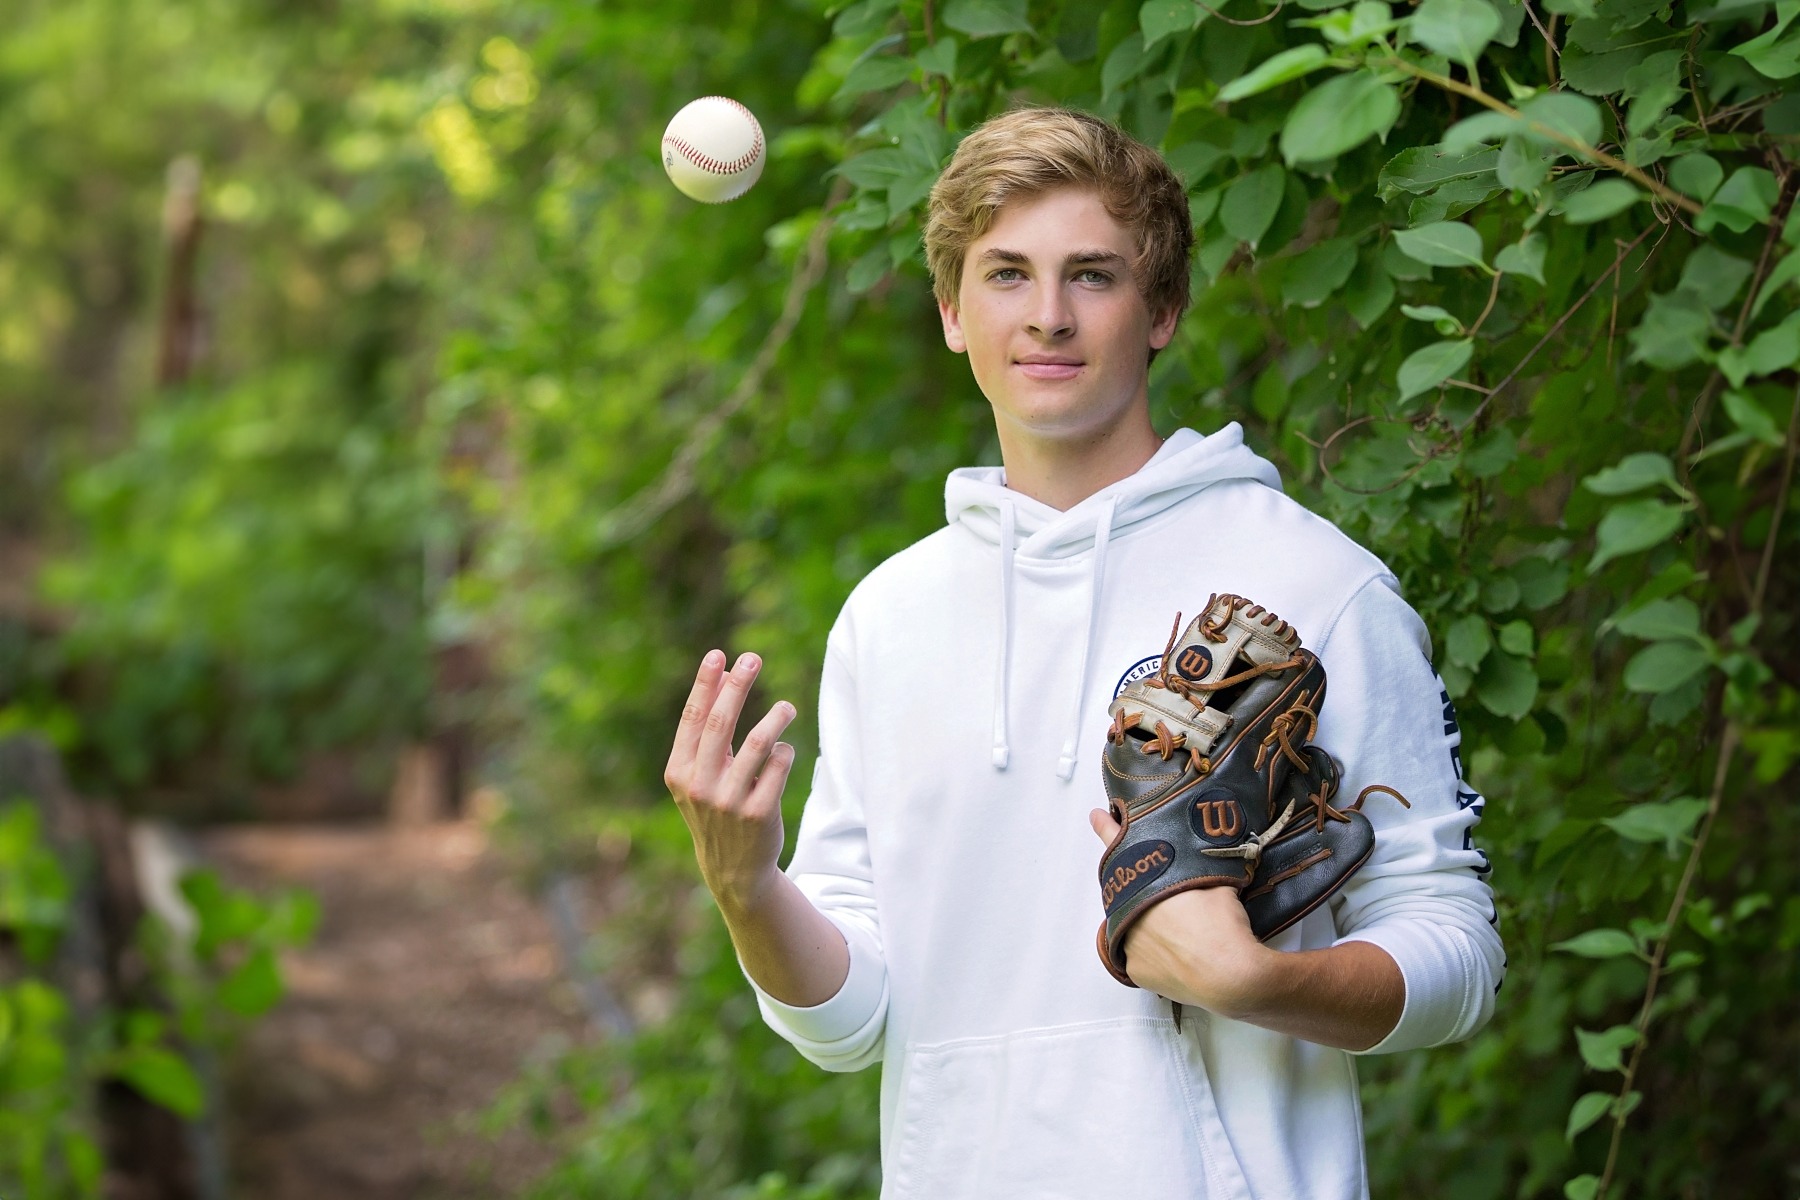 hs senior boy is tossing a baseball in the air